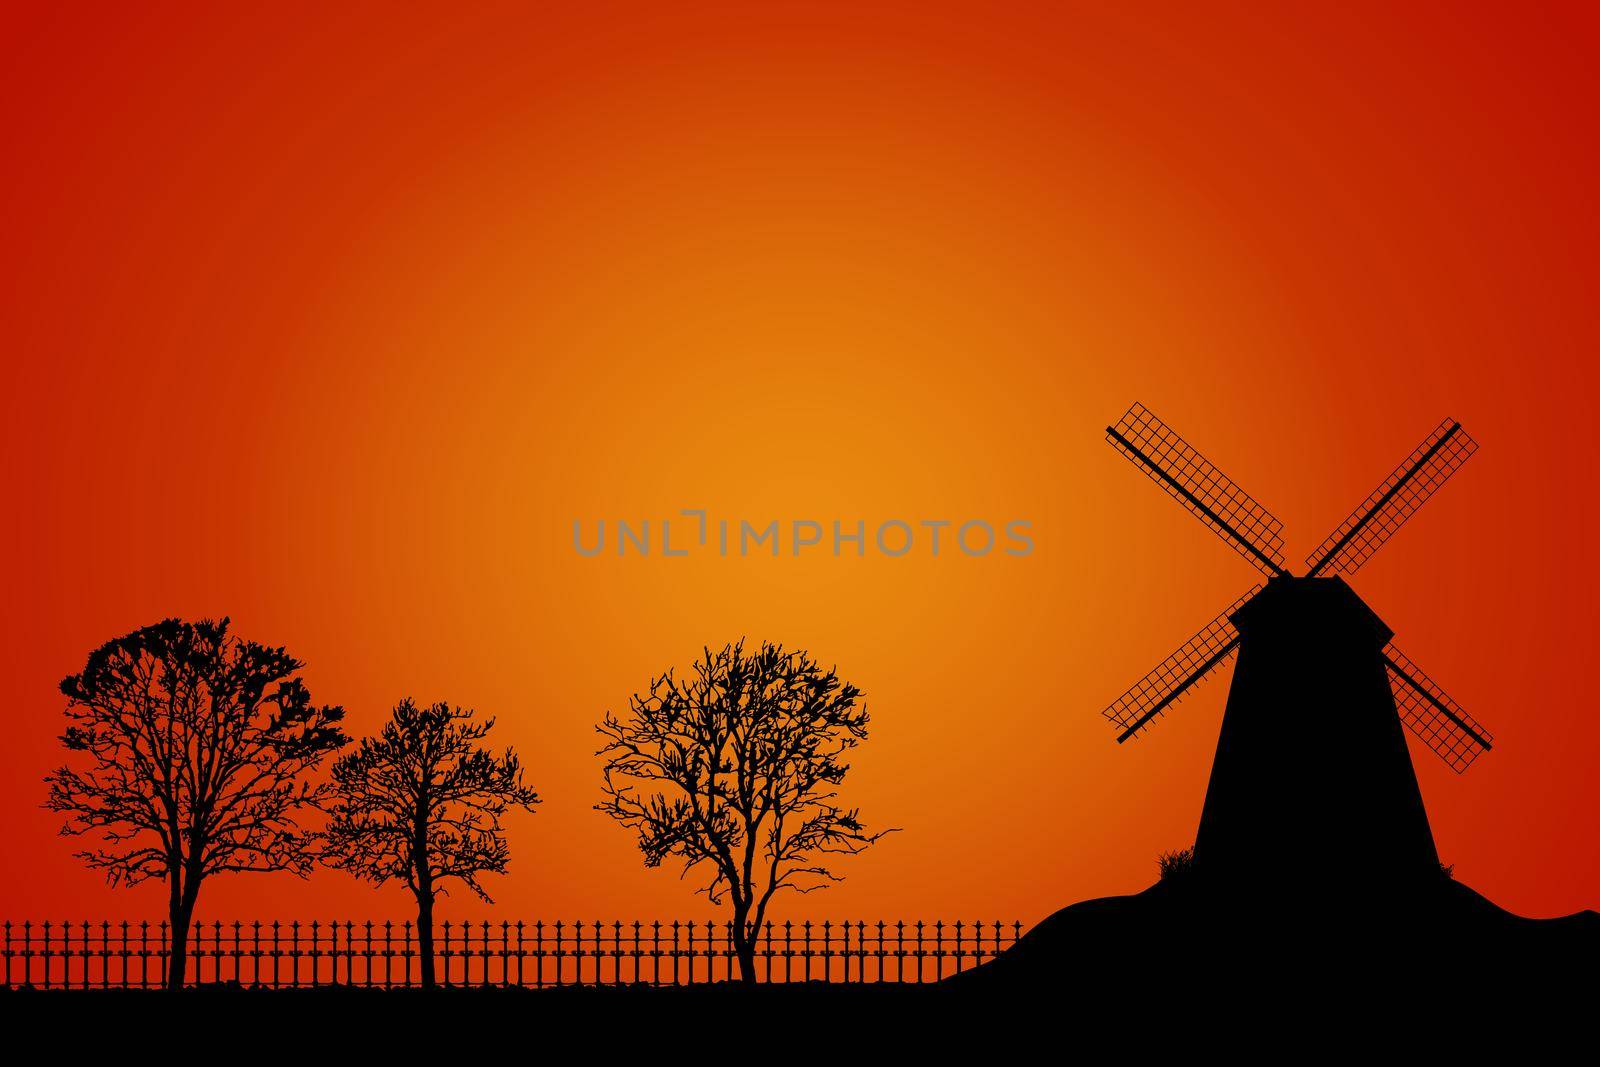 Landscape with windmill, trees and fence silhouette on orange sky background. Dutch rural scenery with wind mill at sunset. Stock vector illustration by KajaNi